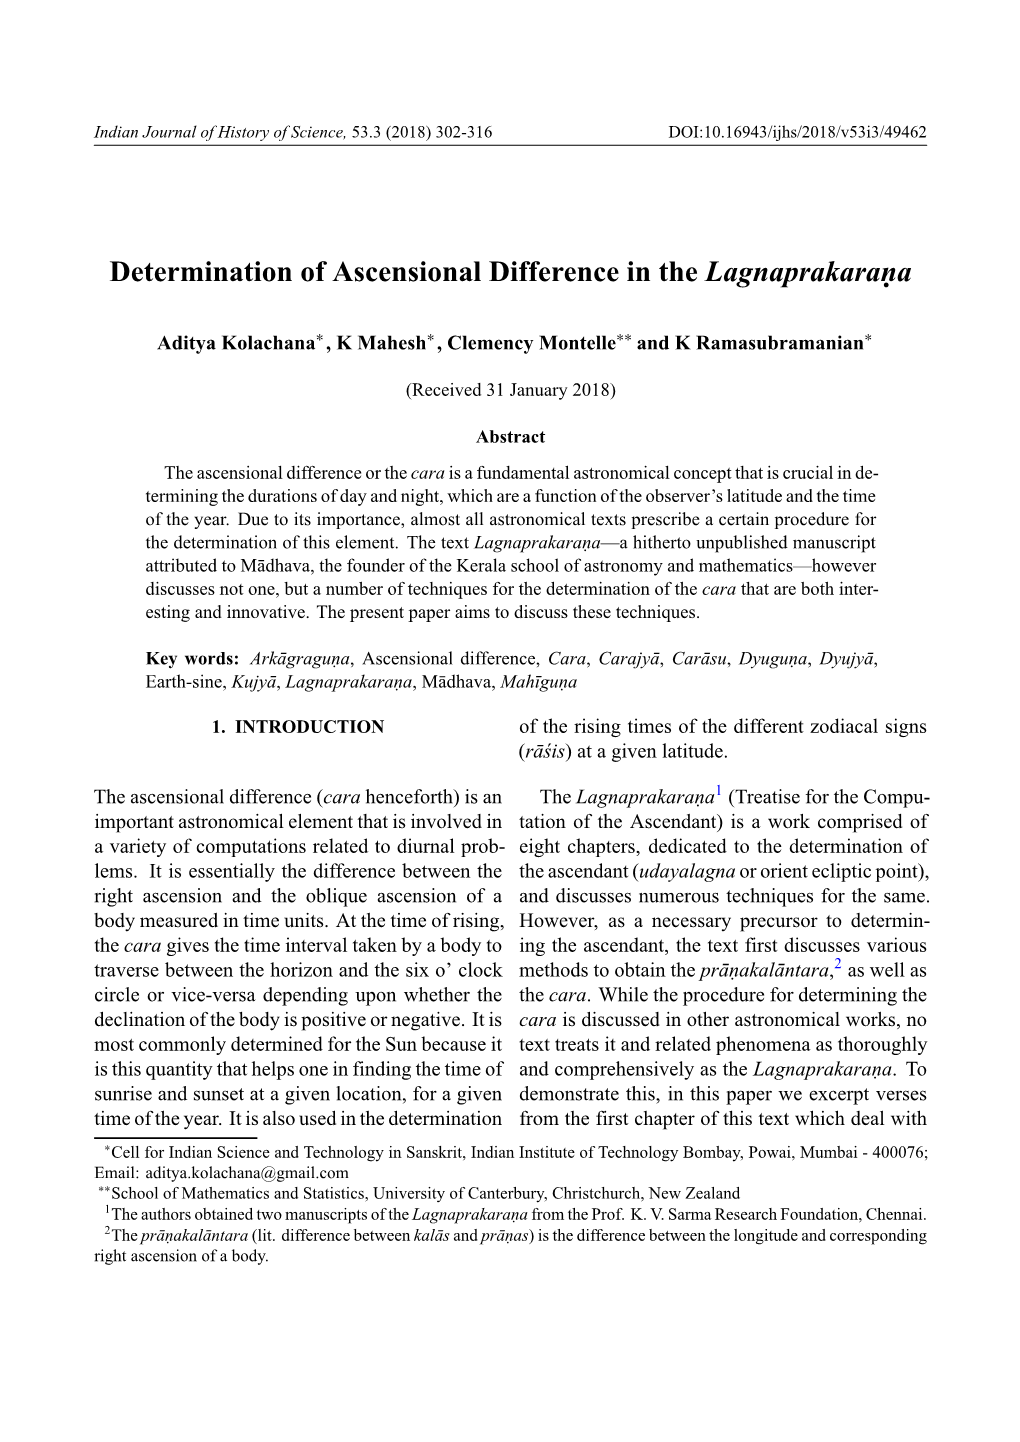 Determination of Ascensional Difference in the Lagnaprakaraṇa